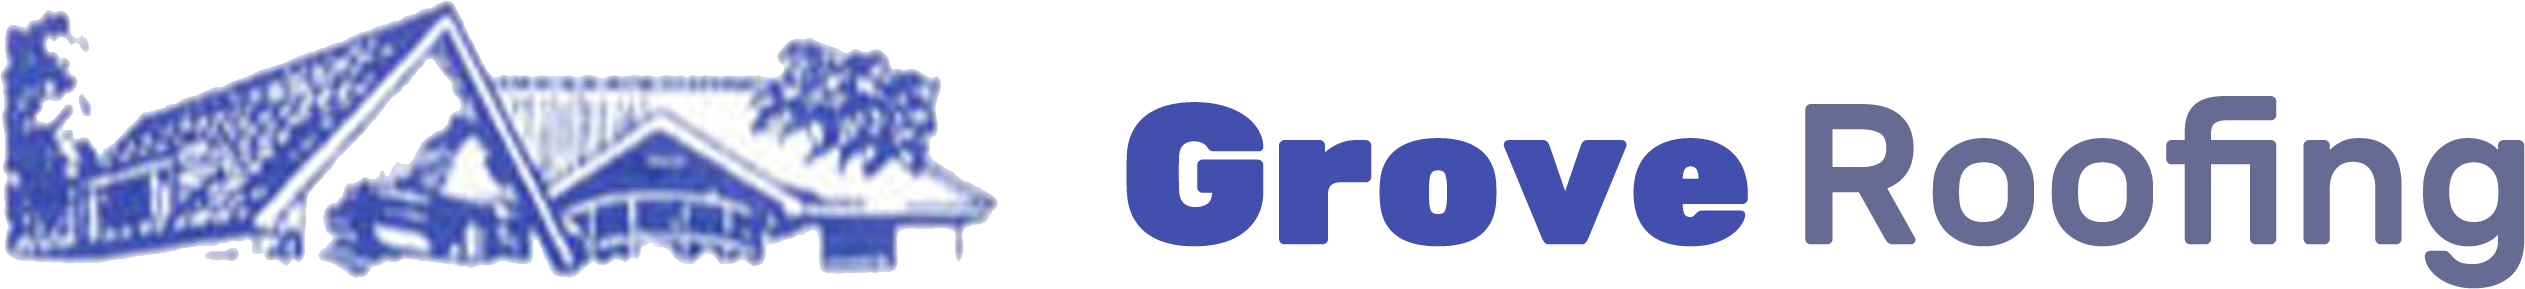 Grove Roofing